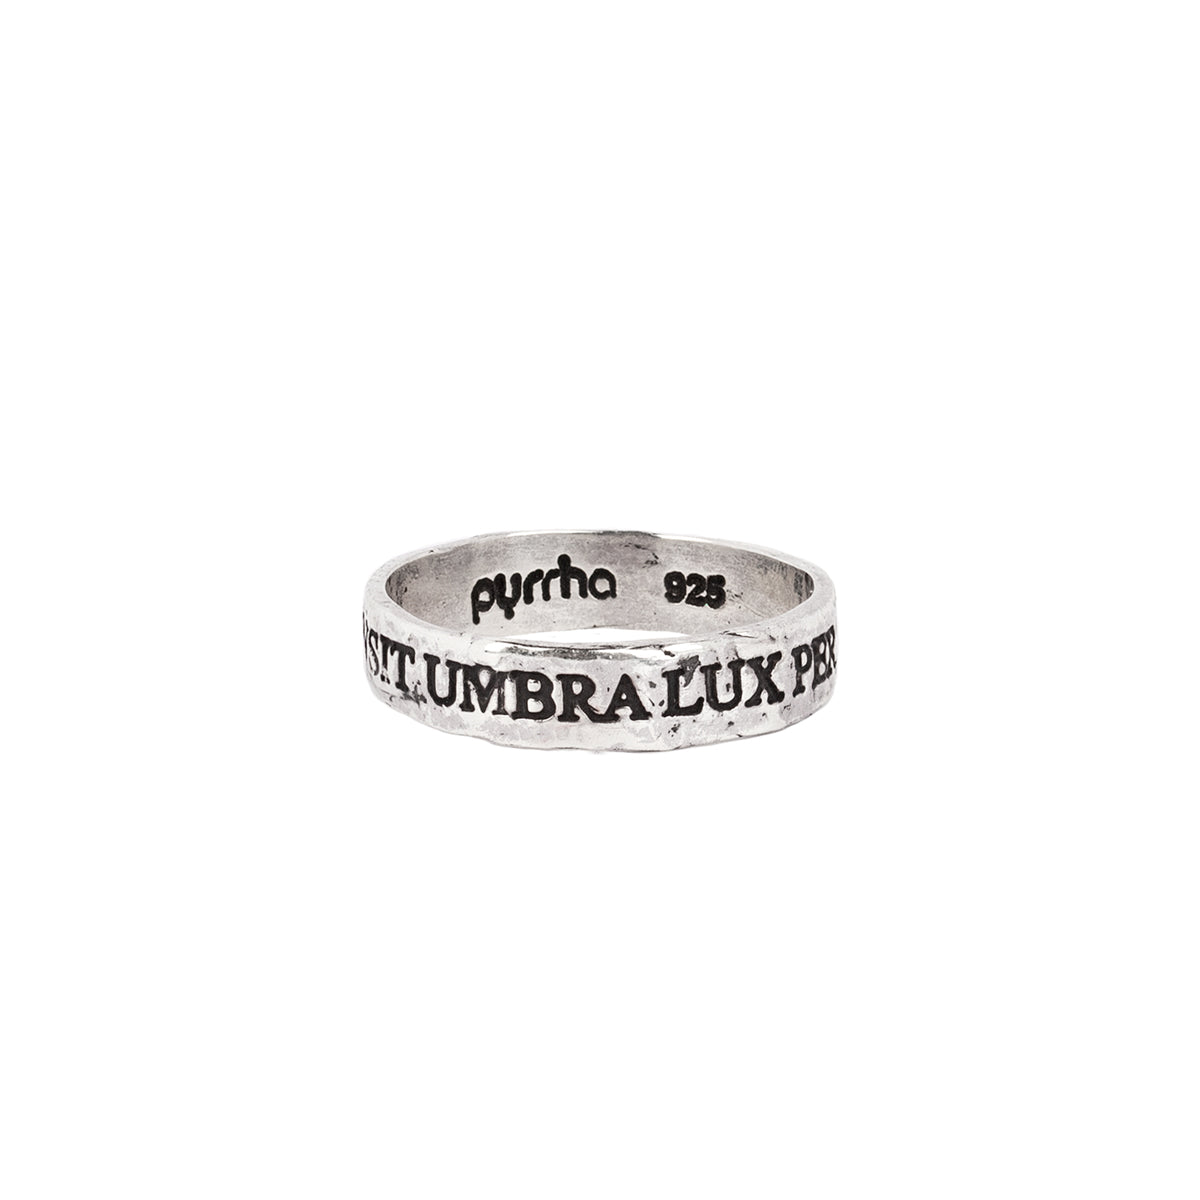 A silver band ring with the phrase Transit Umbra Lux Permanet engraved into it